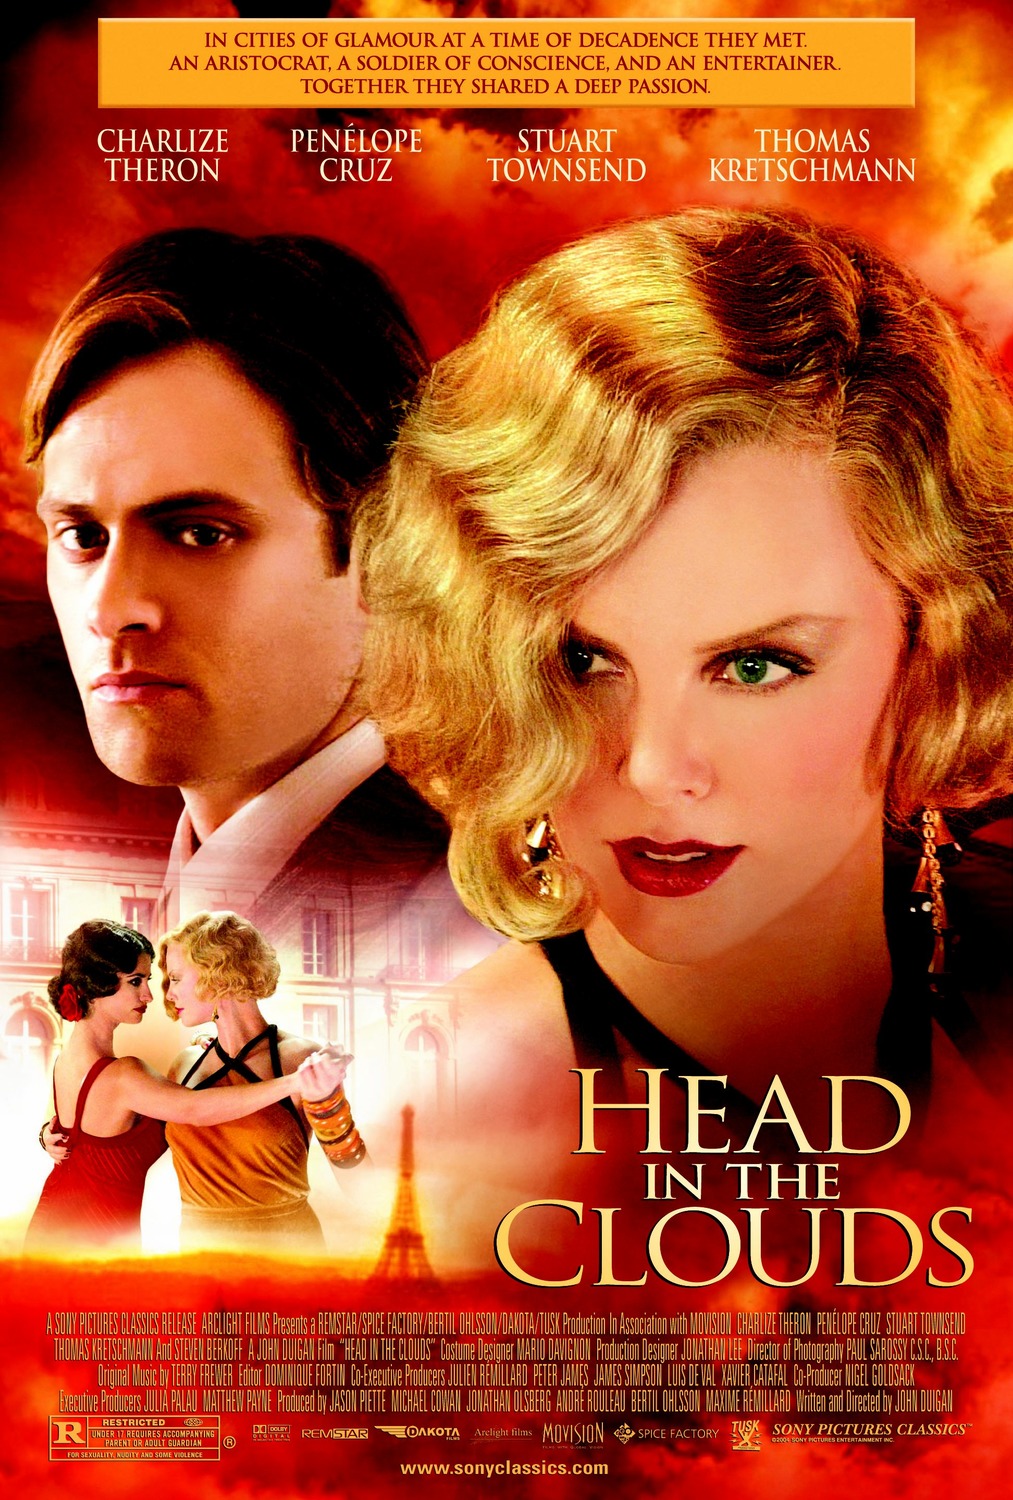 Head in the Clouds (2 of 7) Extra Large Movie Poster Image IMP Awards